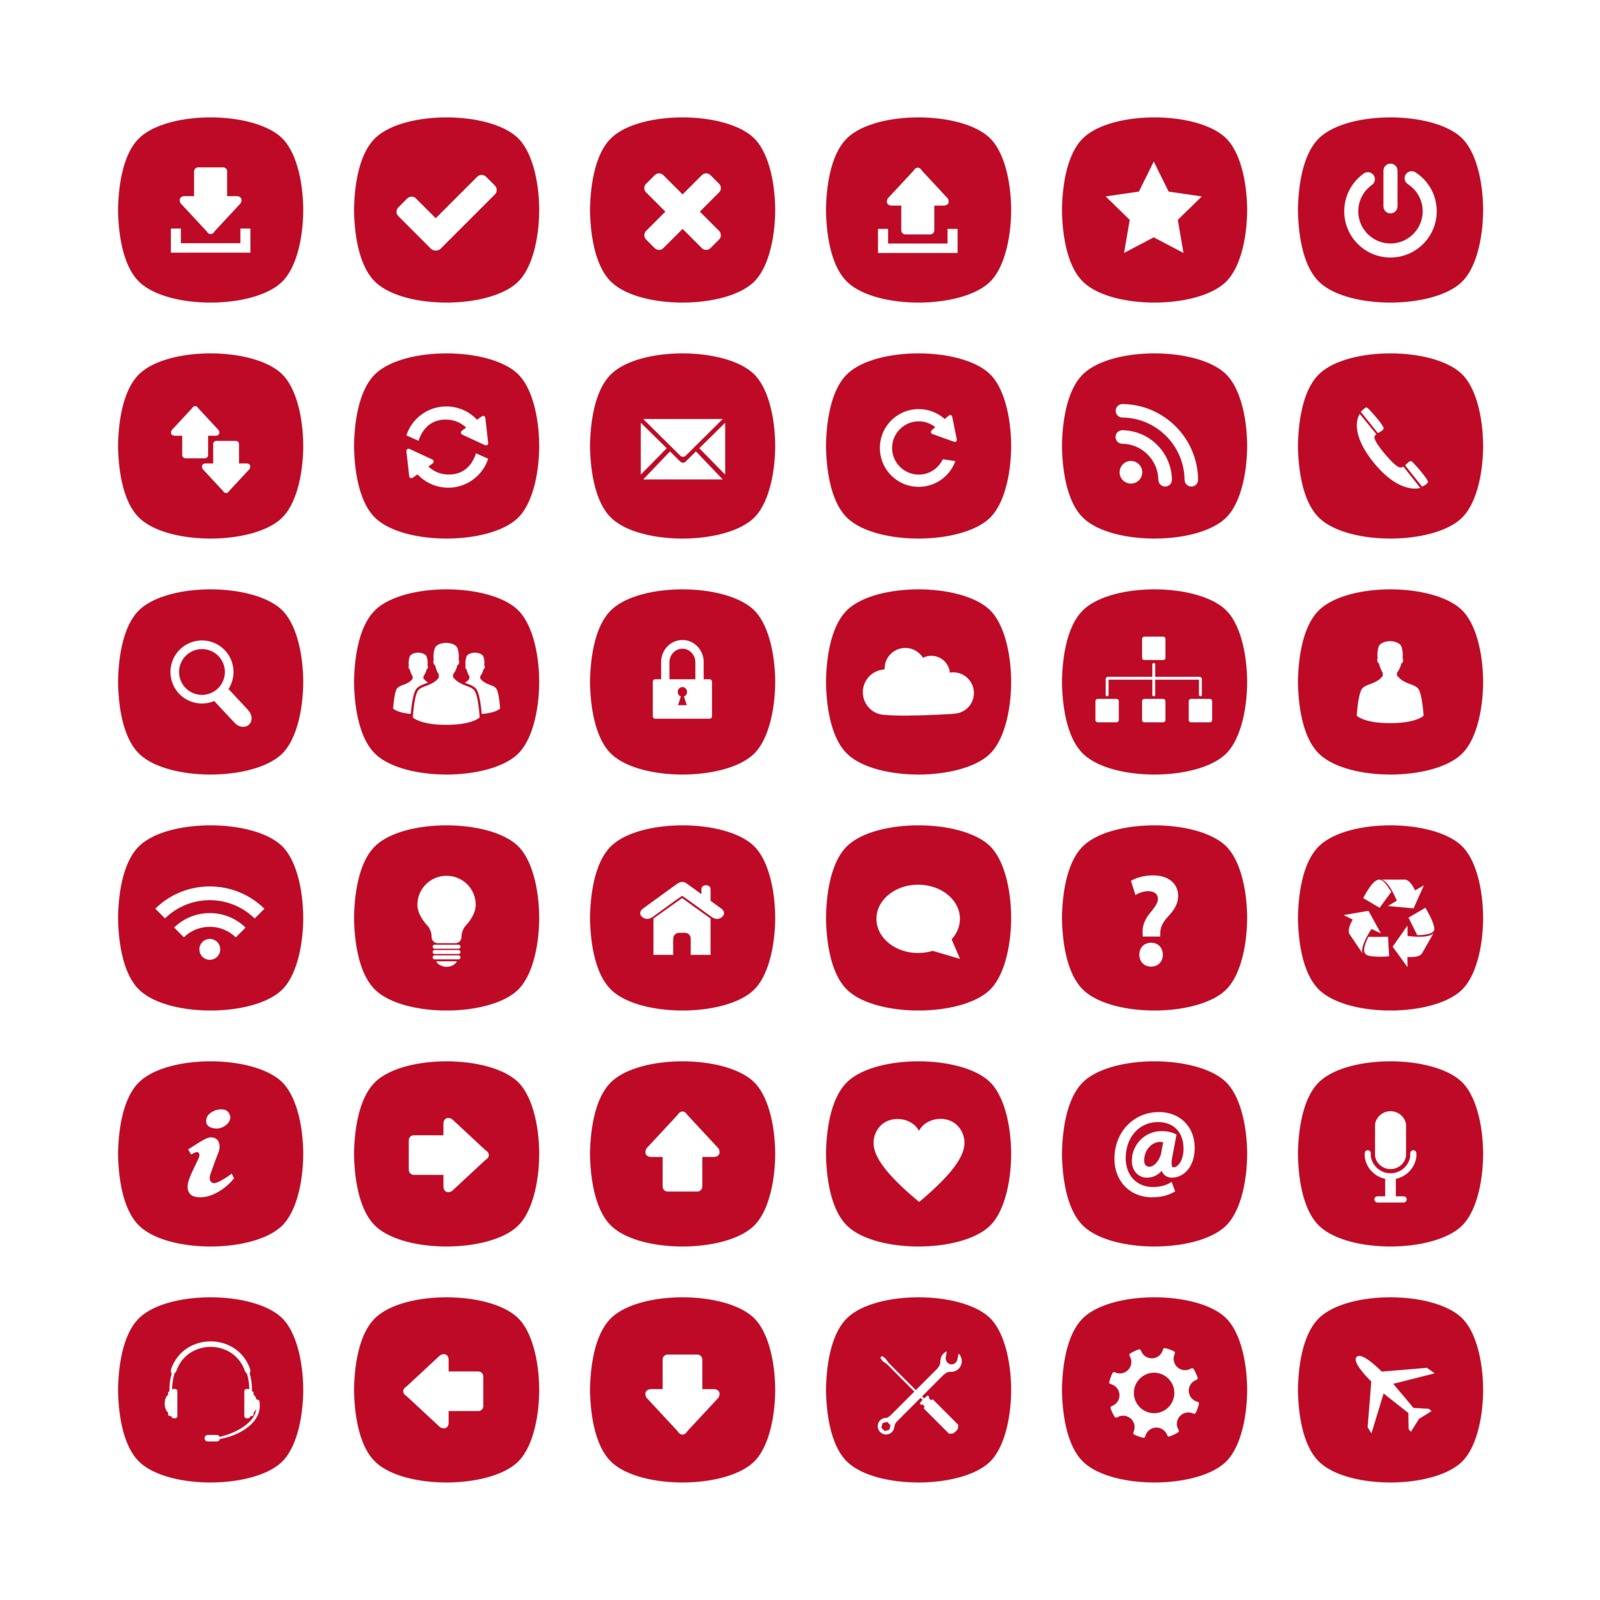 Red flat rounded square icons by simo988